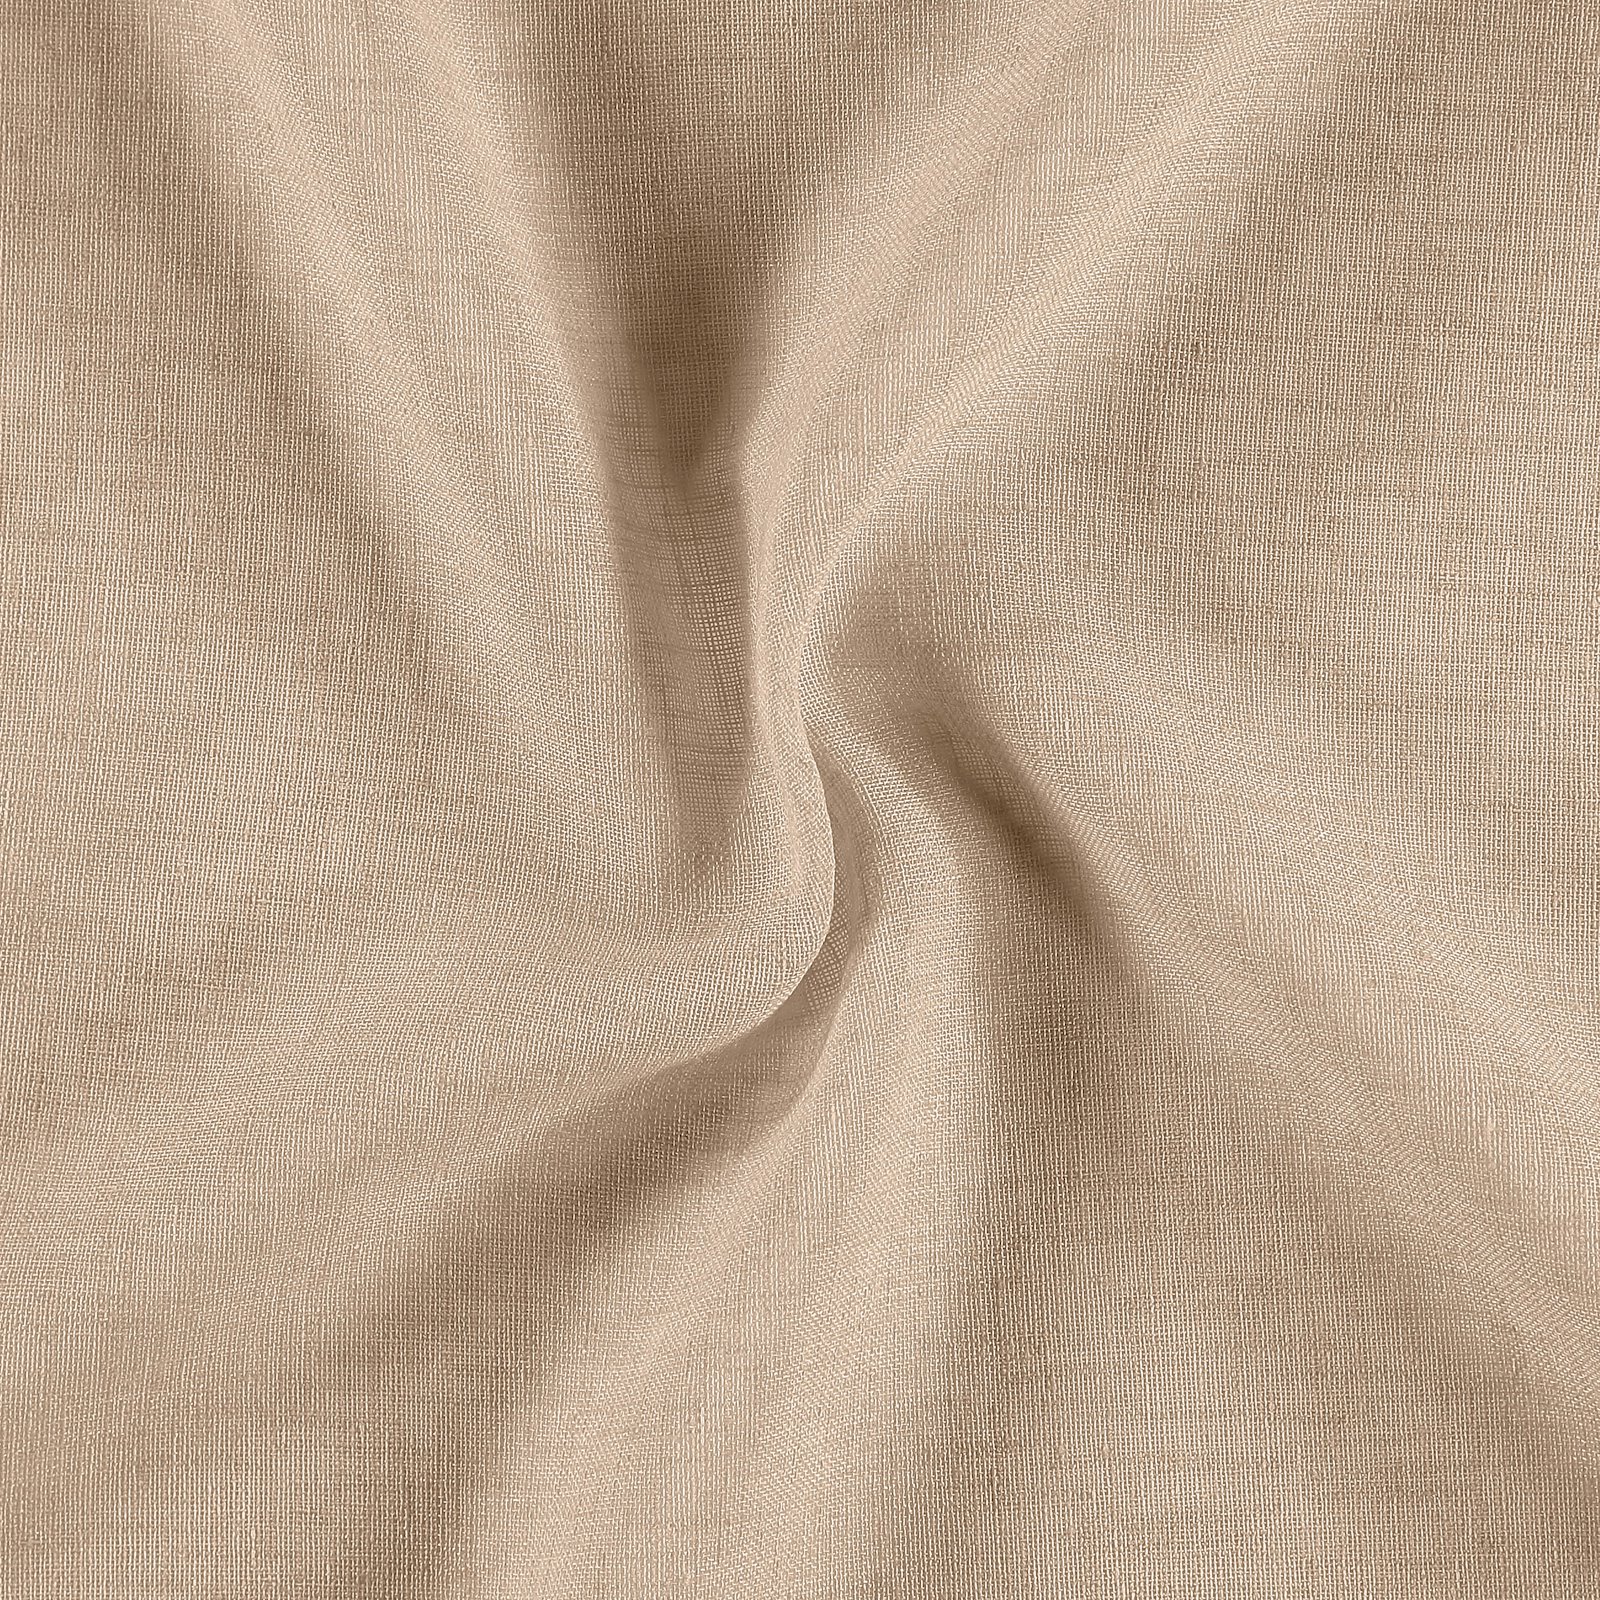 Voile linen look structure 835017_pack